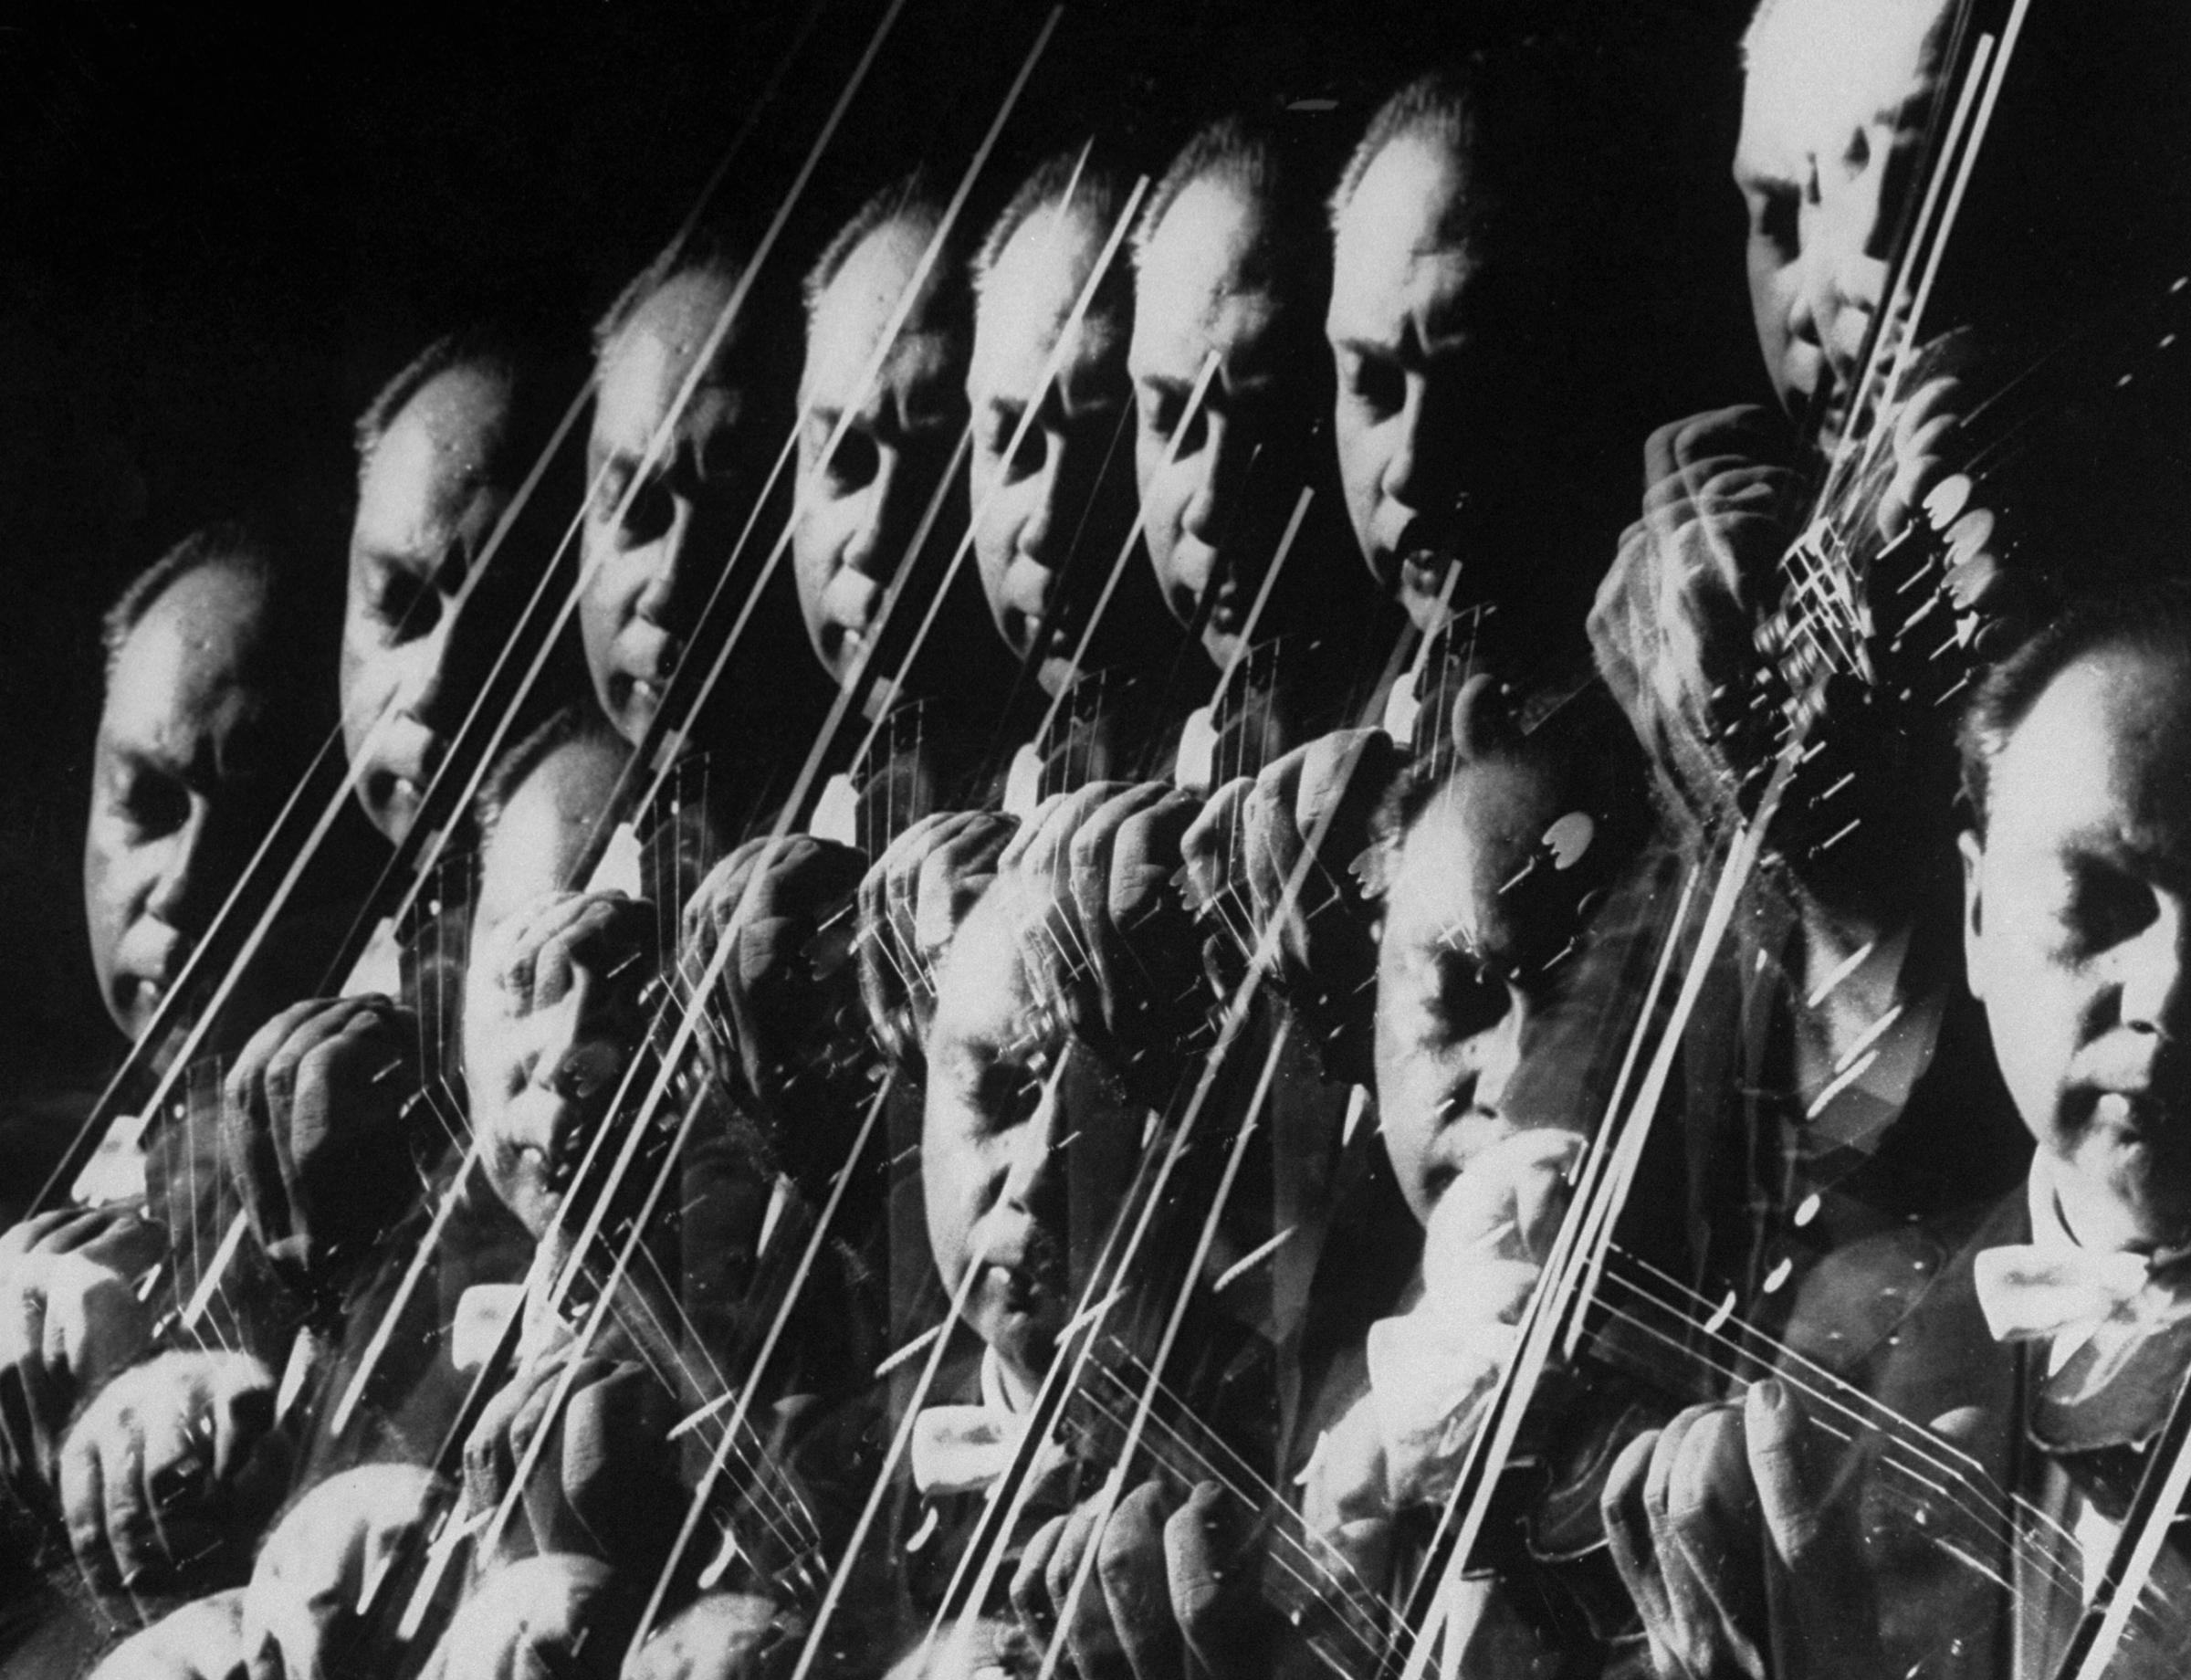 Stroboscopic image showing a repetitive closeup of Isaac Stern playing violin at photographer Gjon Mili's studio in 1959.